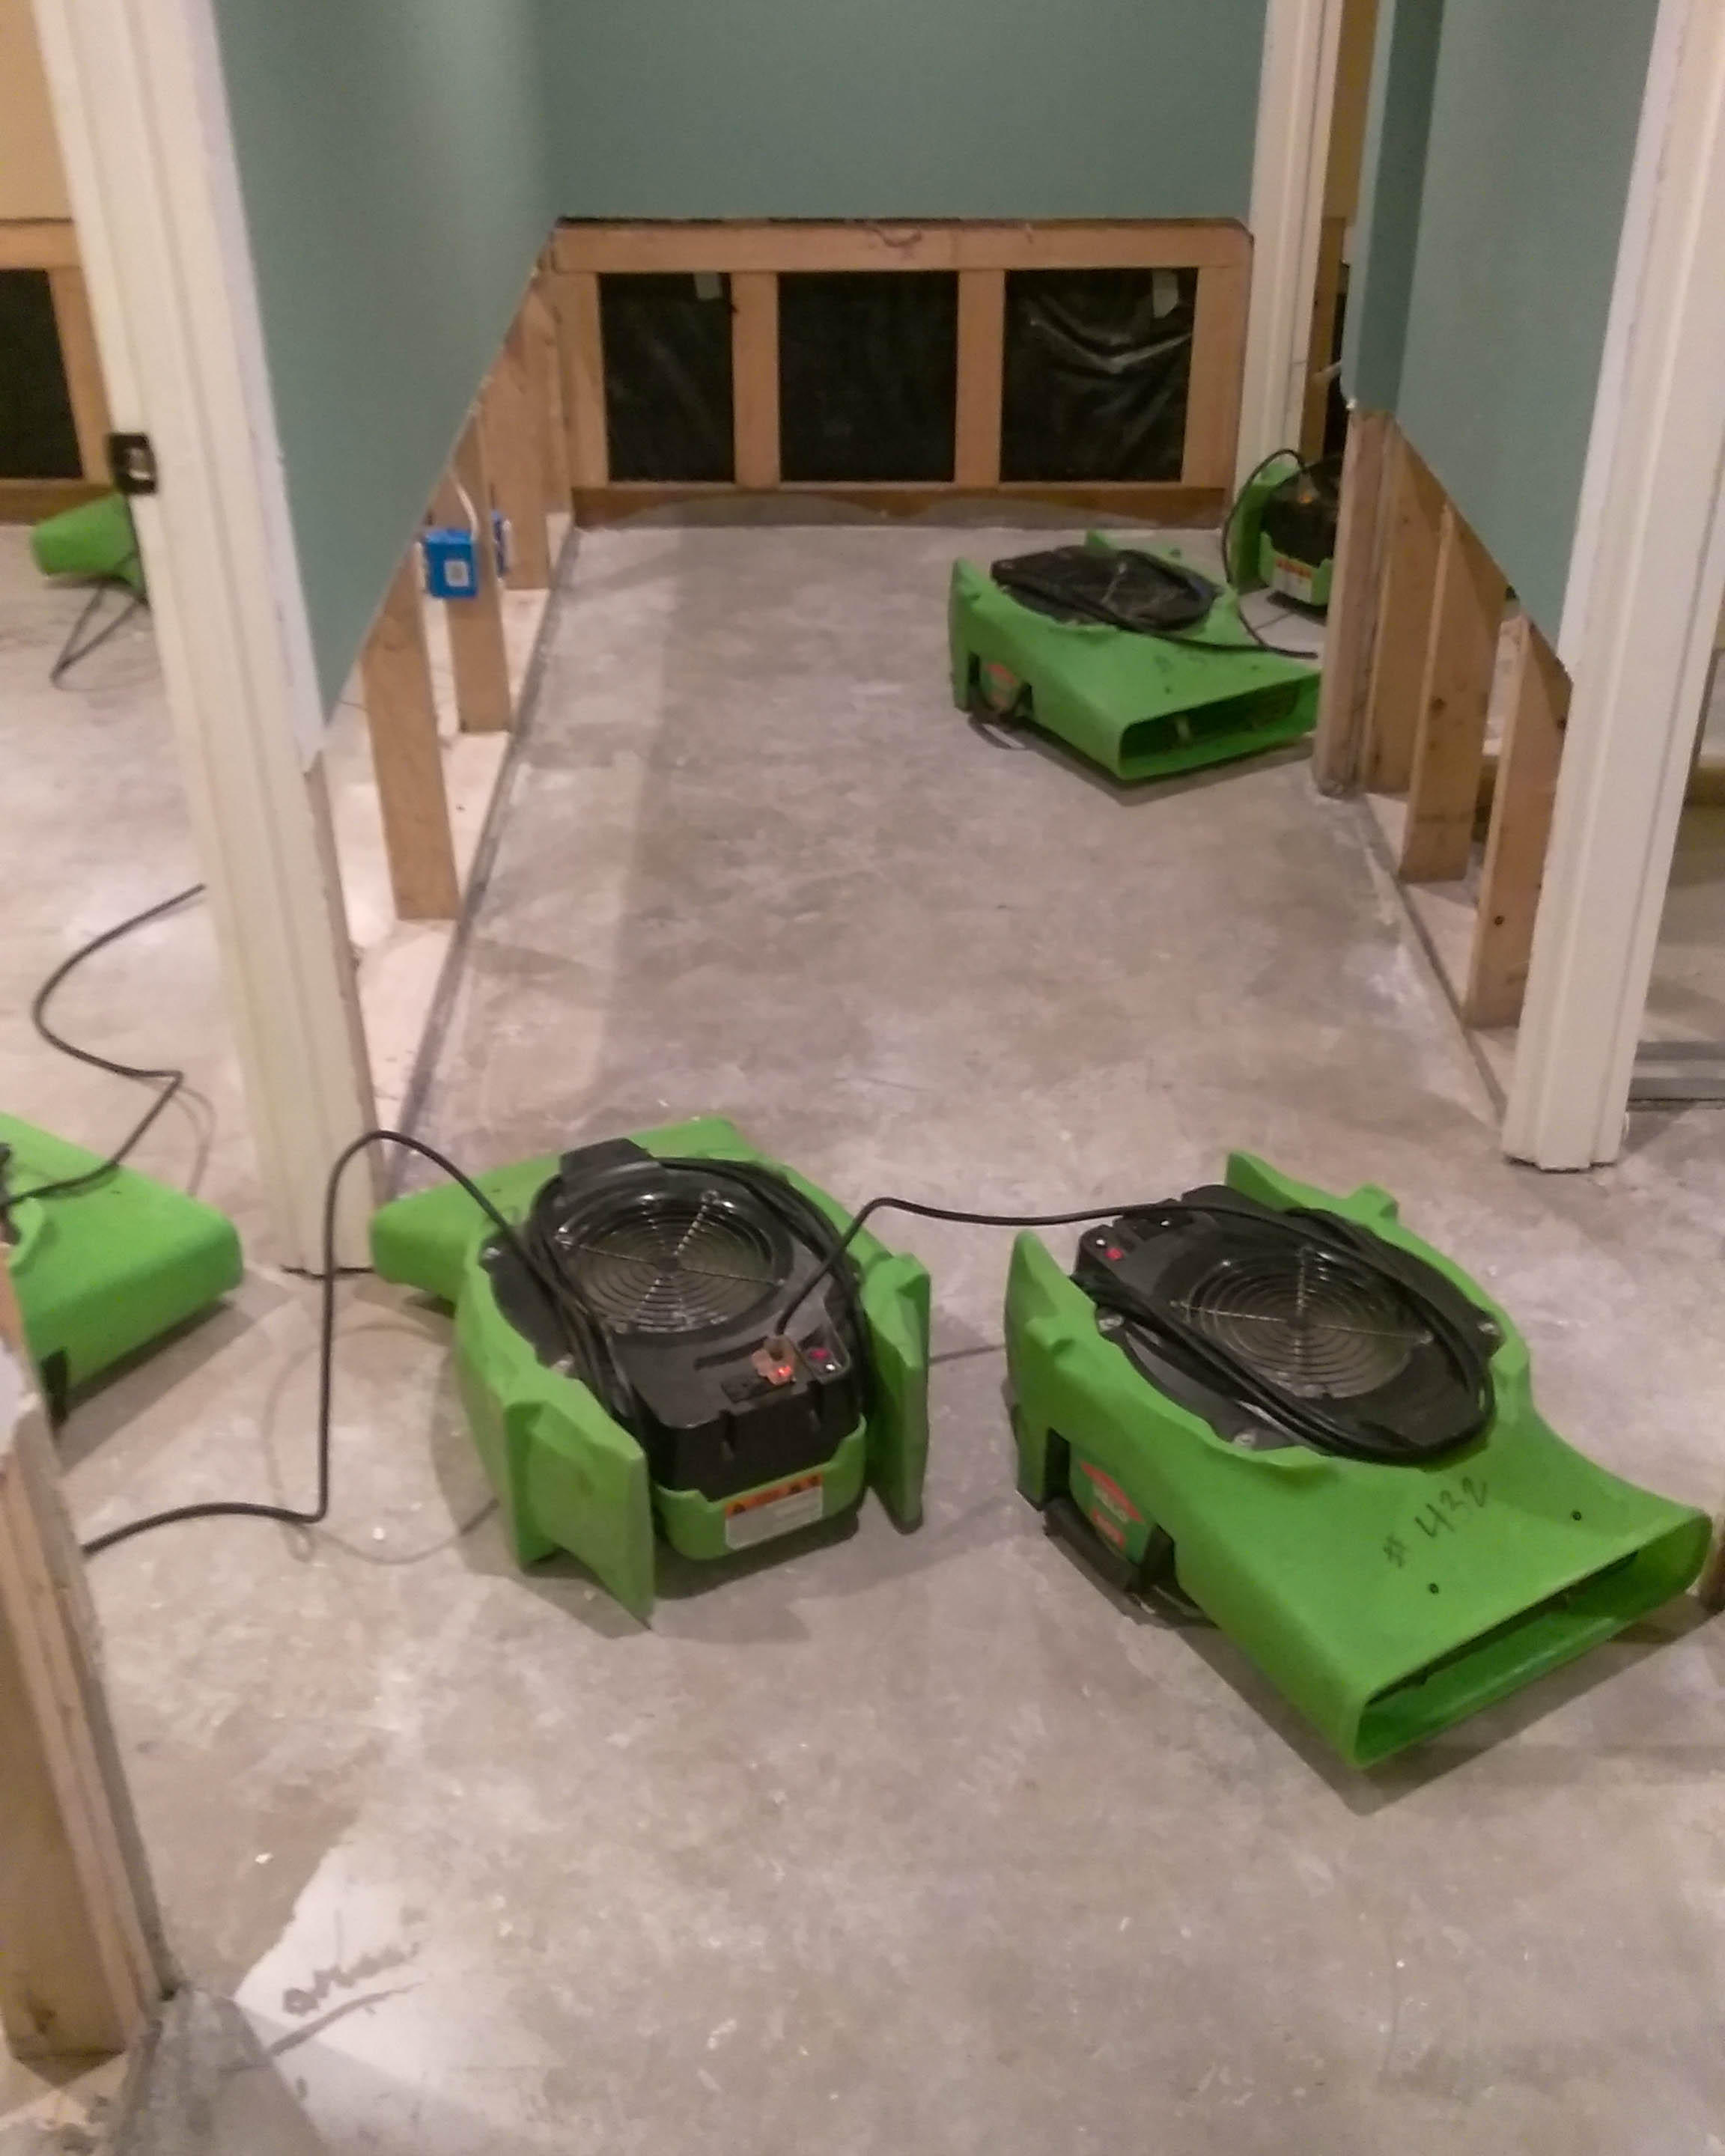 SERVPRO of Renton stays ready on a 24/7 basis to respond to your call for help with water damage in your home. Contact us!